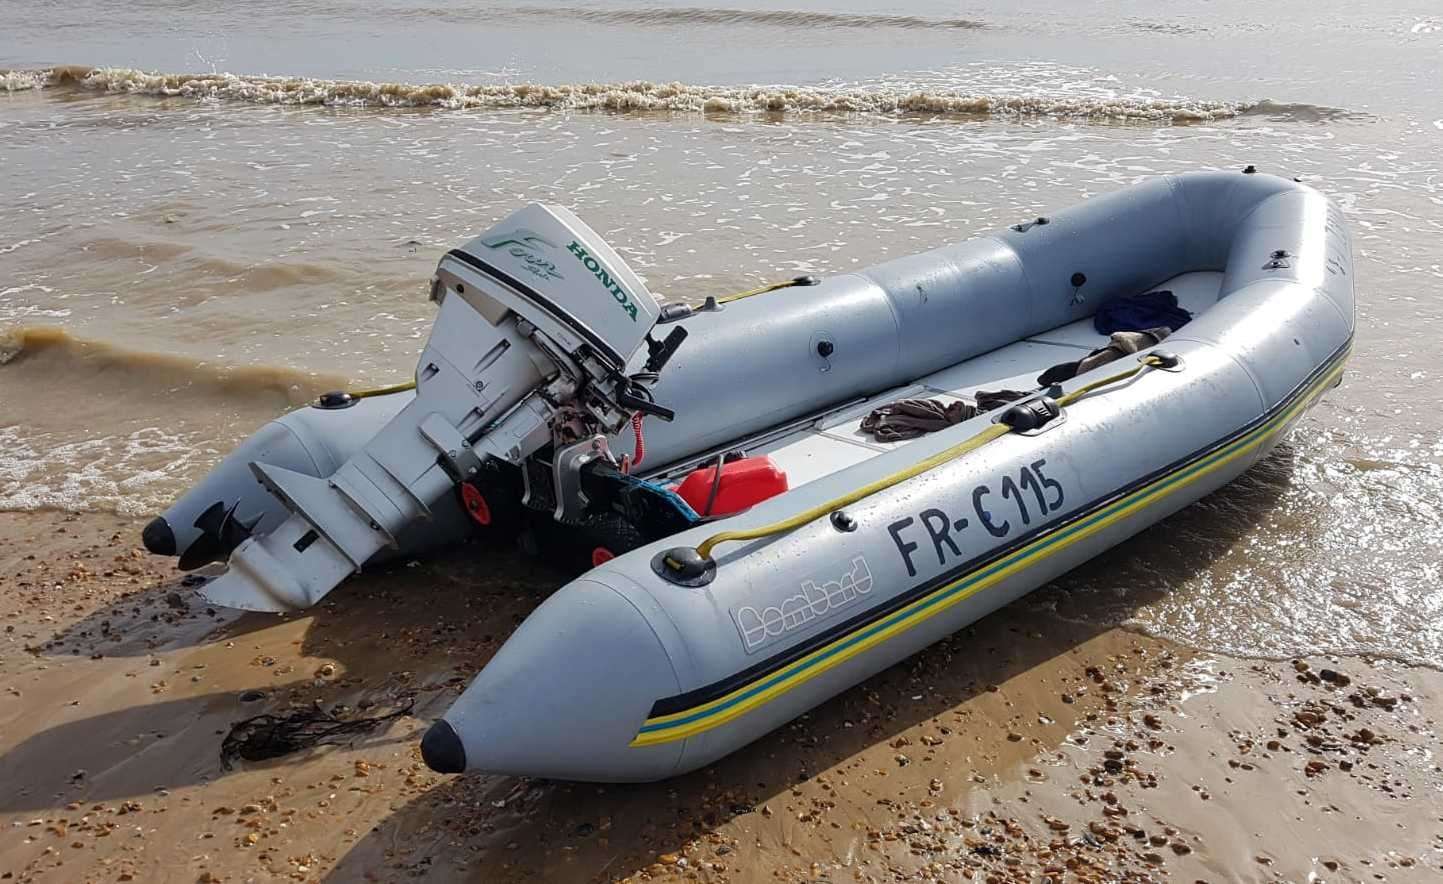 The suspected migrants abandoned the small boat in the water which was pulled onto the shingle by passers by